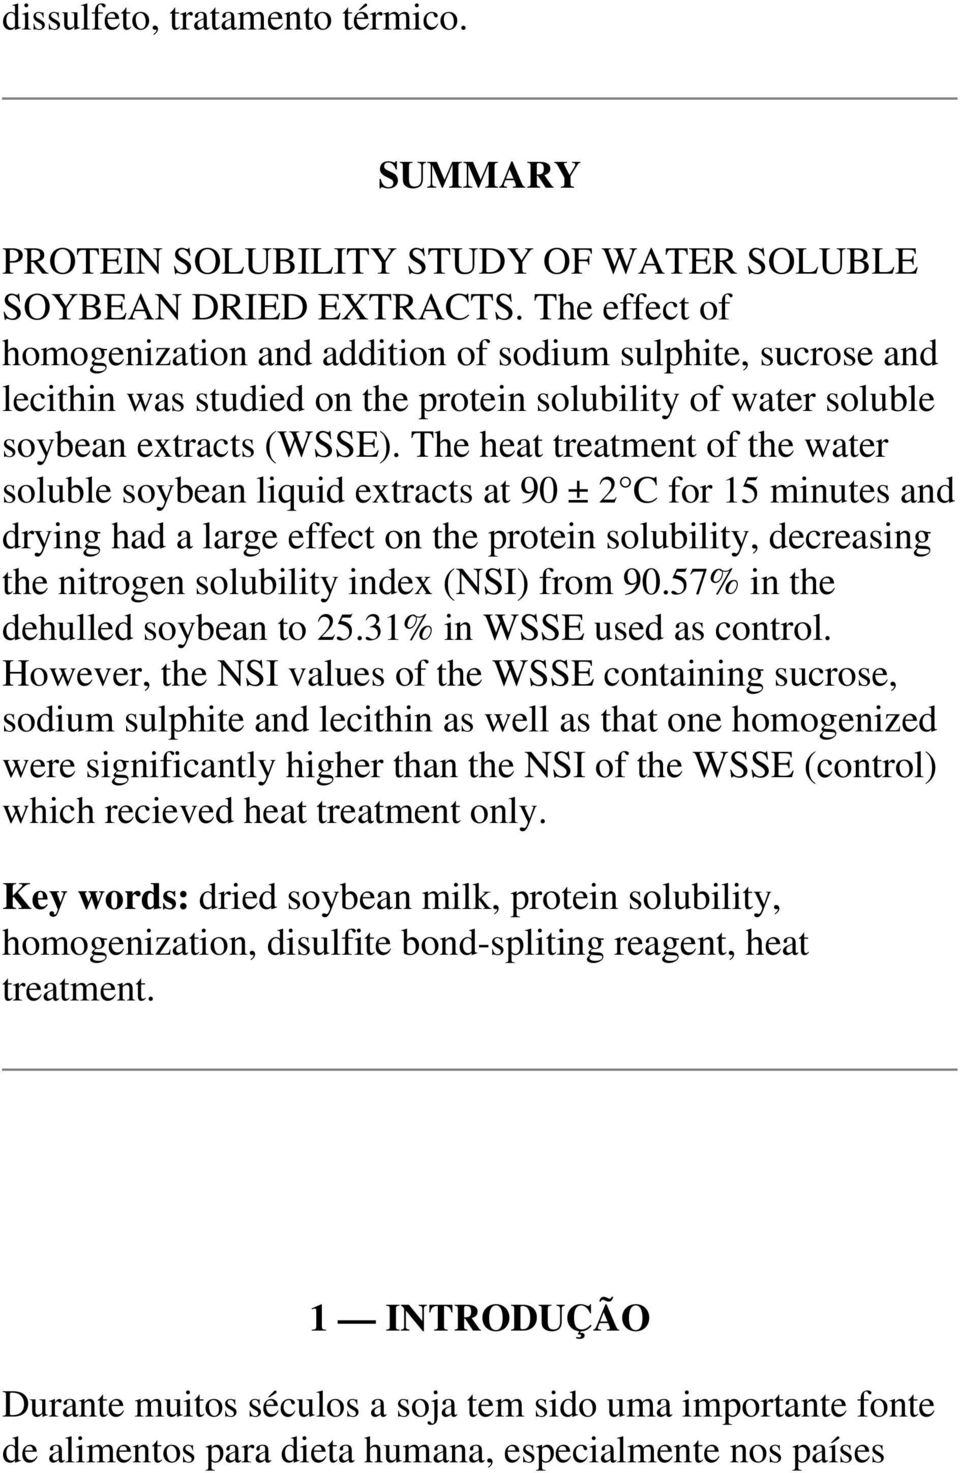 The heat treatment of the water soluble soybean liquid extracts at 90 ± 2 C for 15 minutes and drying had a large effect on the protein solubility, decreasing the nitrogen solubility index (NSI) from